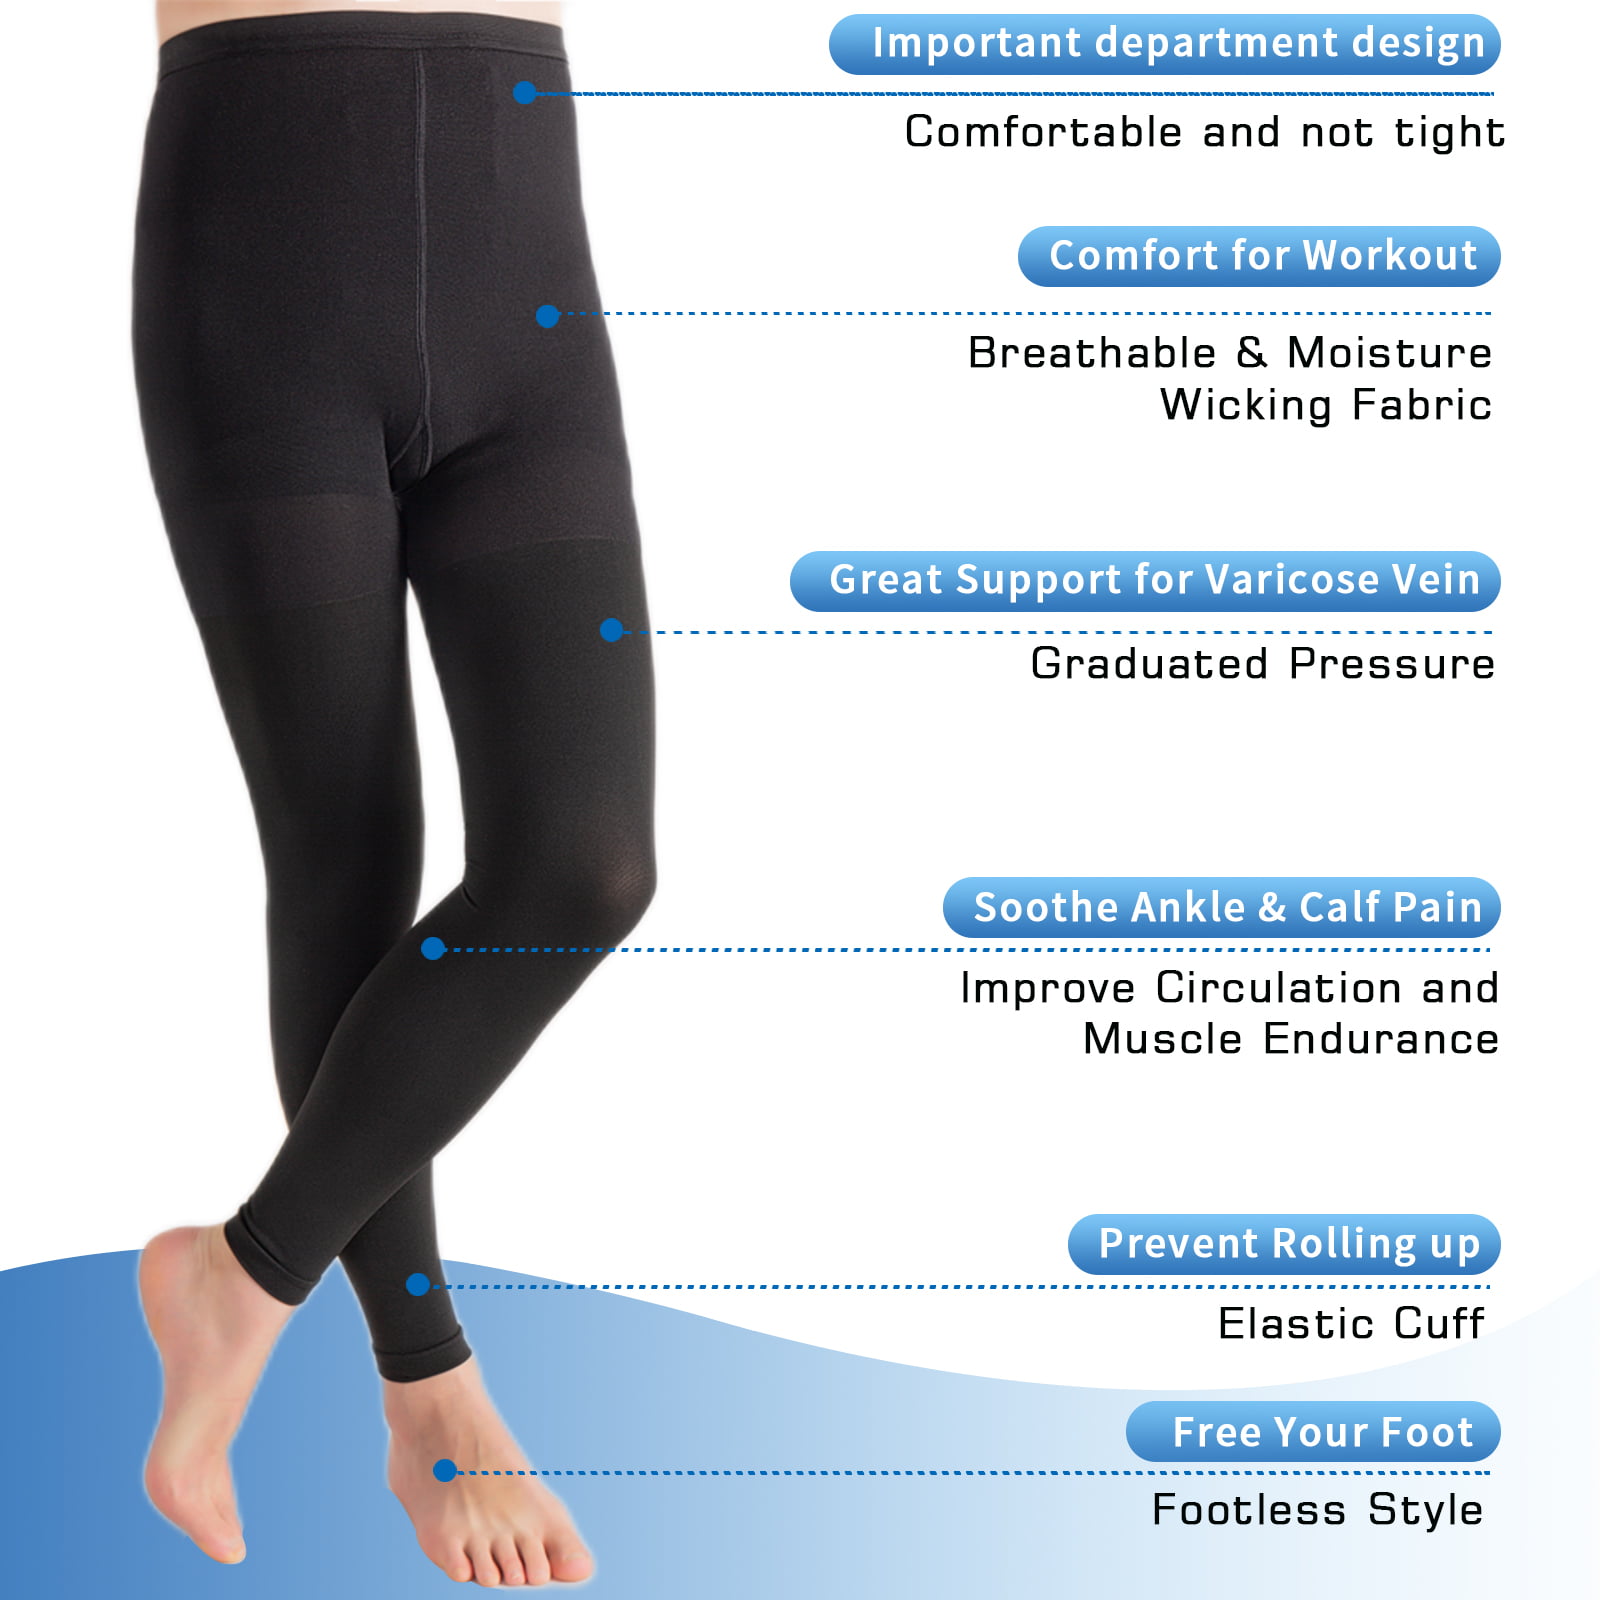 Ailaka Compression Pantyhose for Men Women Firm Graduated Support 20-30mmHg  Medical Compression Tights High Waist